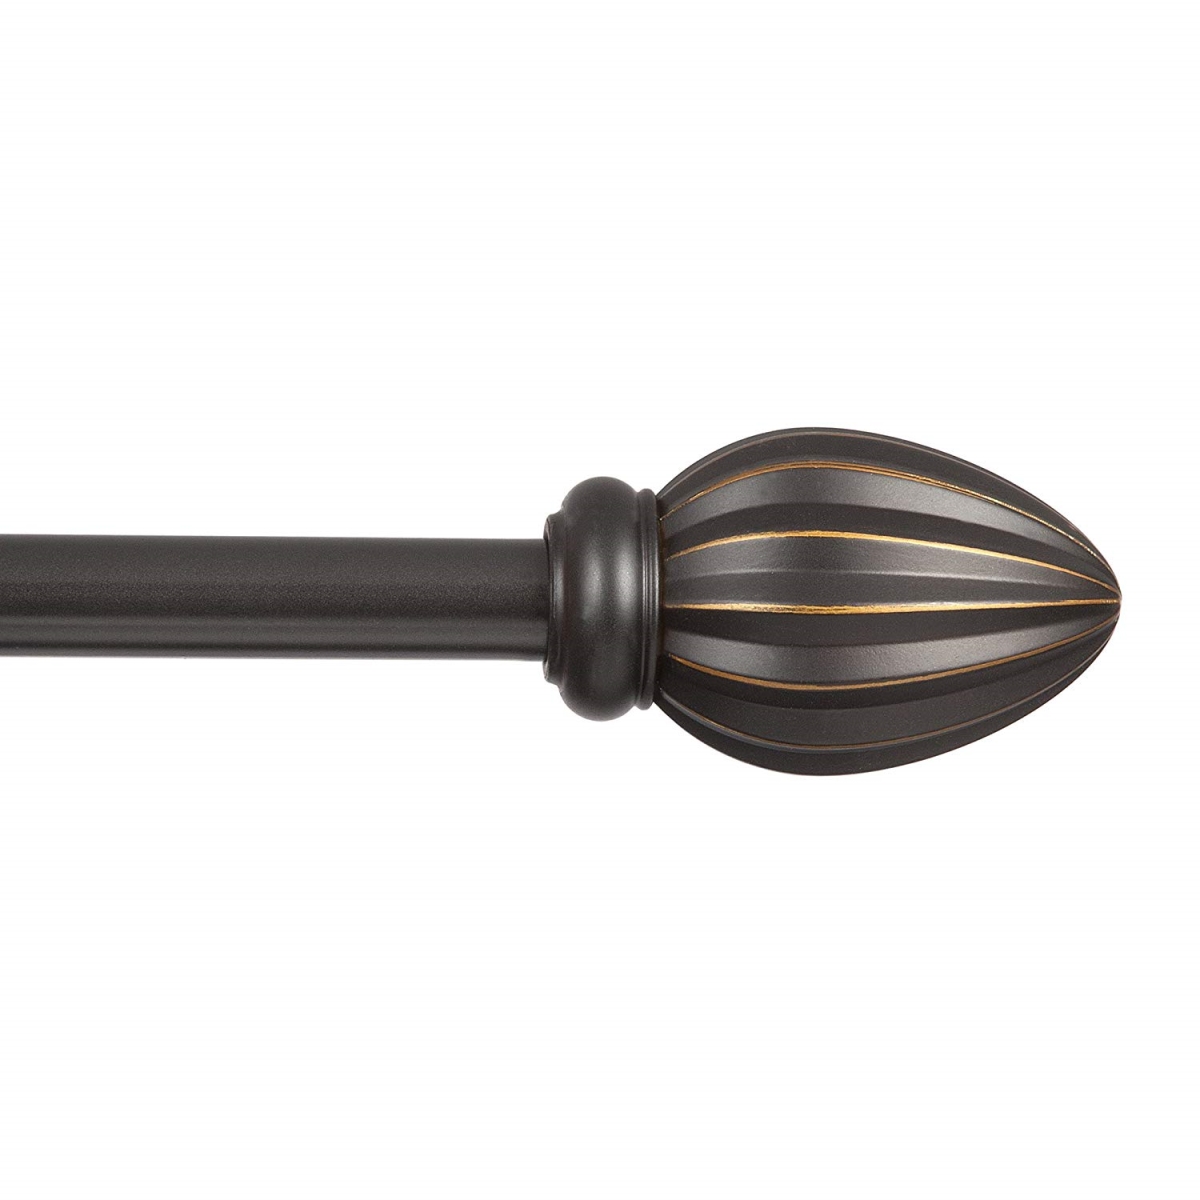 Kn75246 36-66 In. Oil Rubbed Bronze Fast Fit Bailey Curtain Rod